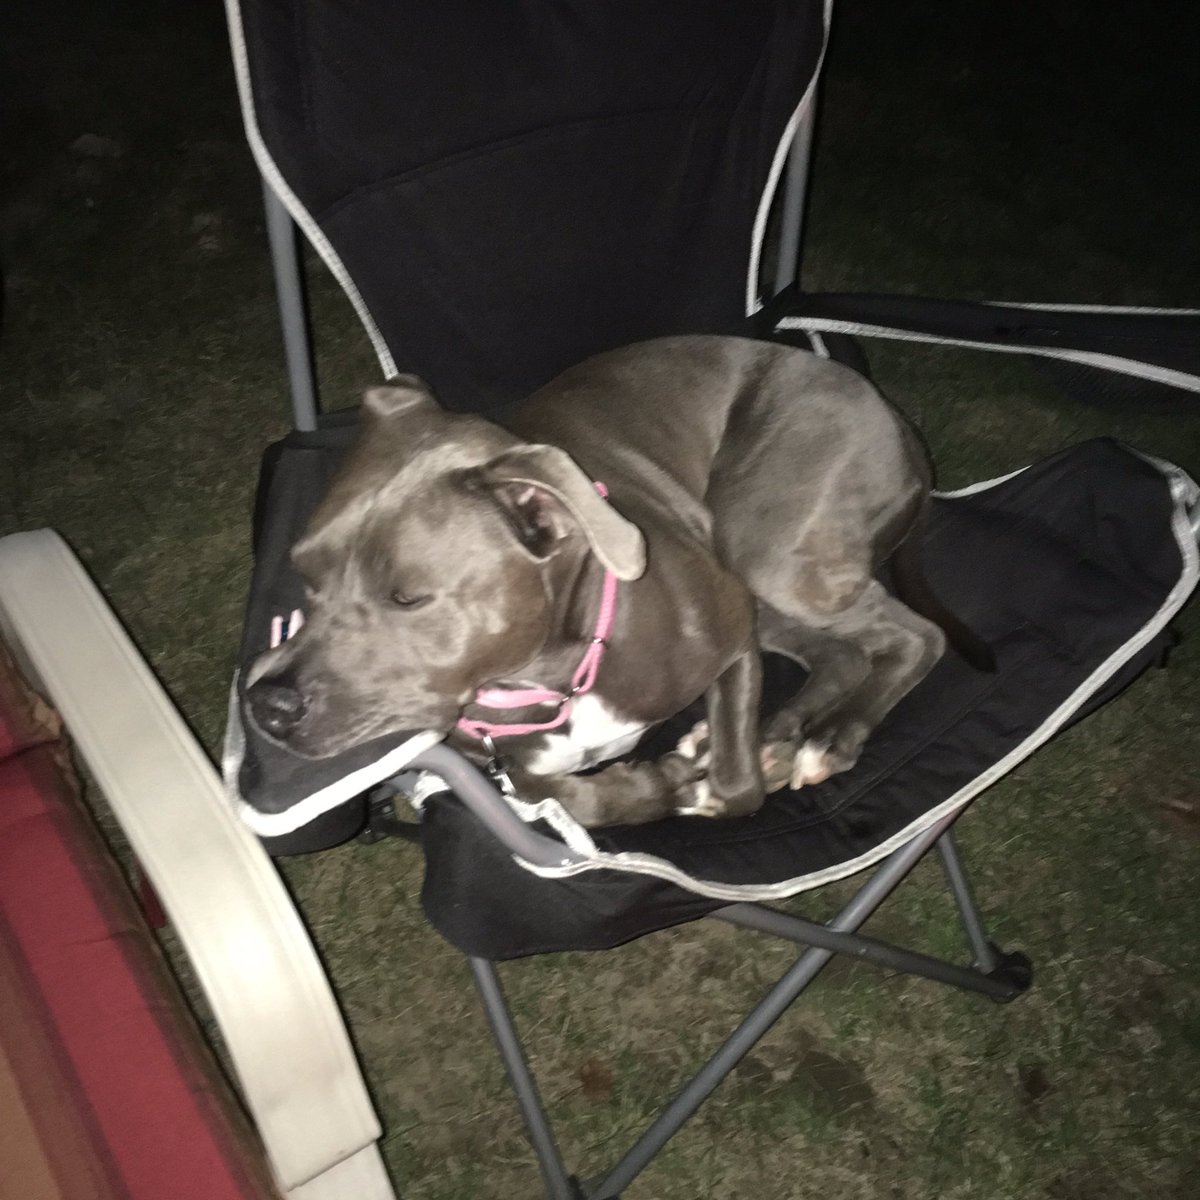 Only Maggie needs her own chair by the bonfire. 😂 #SpoiledMuch